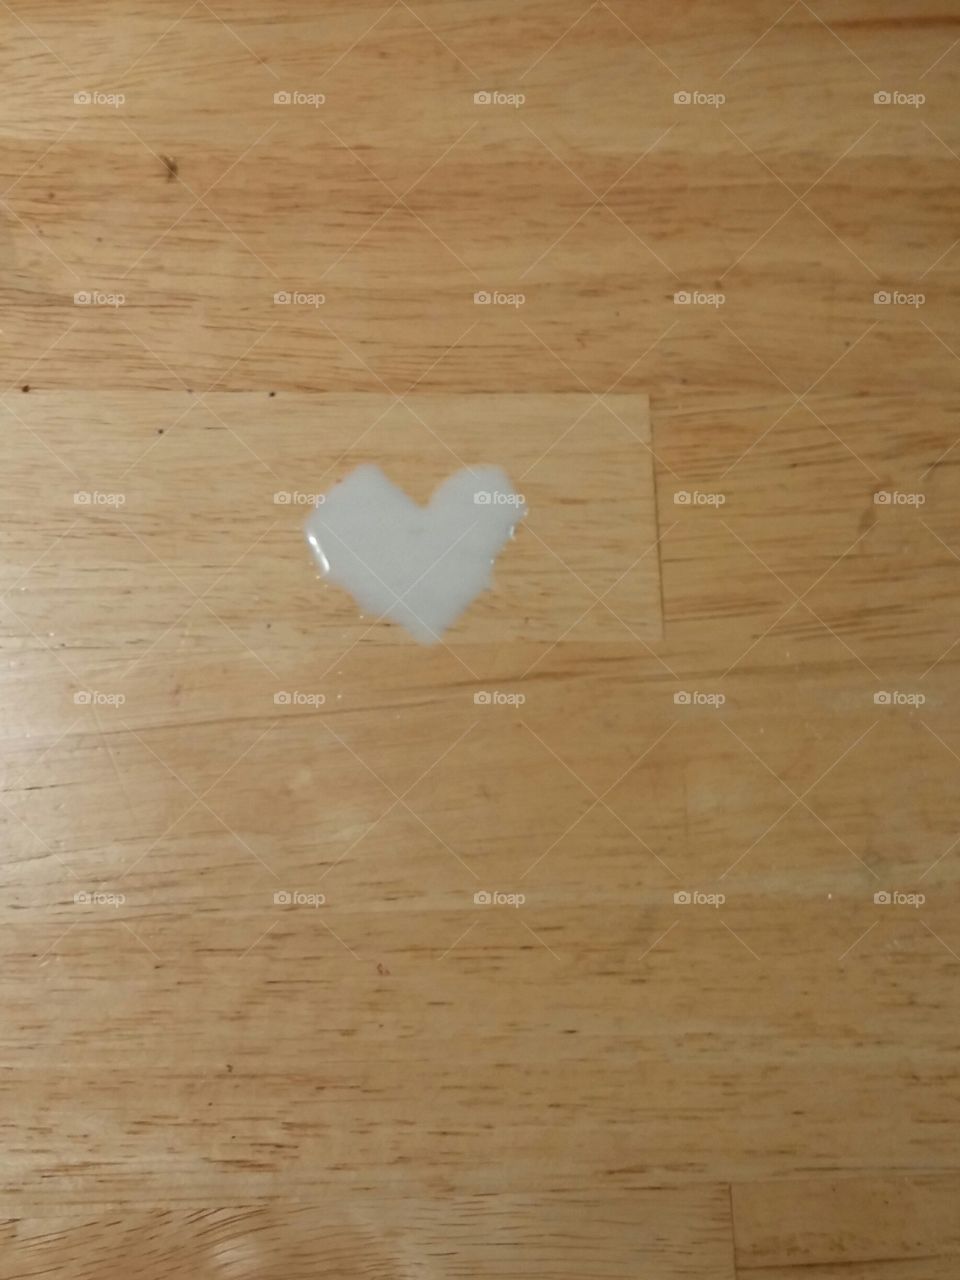 Spilled Milk. My daughter spilled her milk on the shape of a heart. 